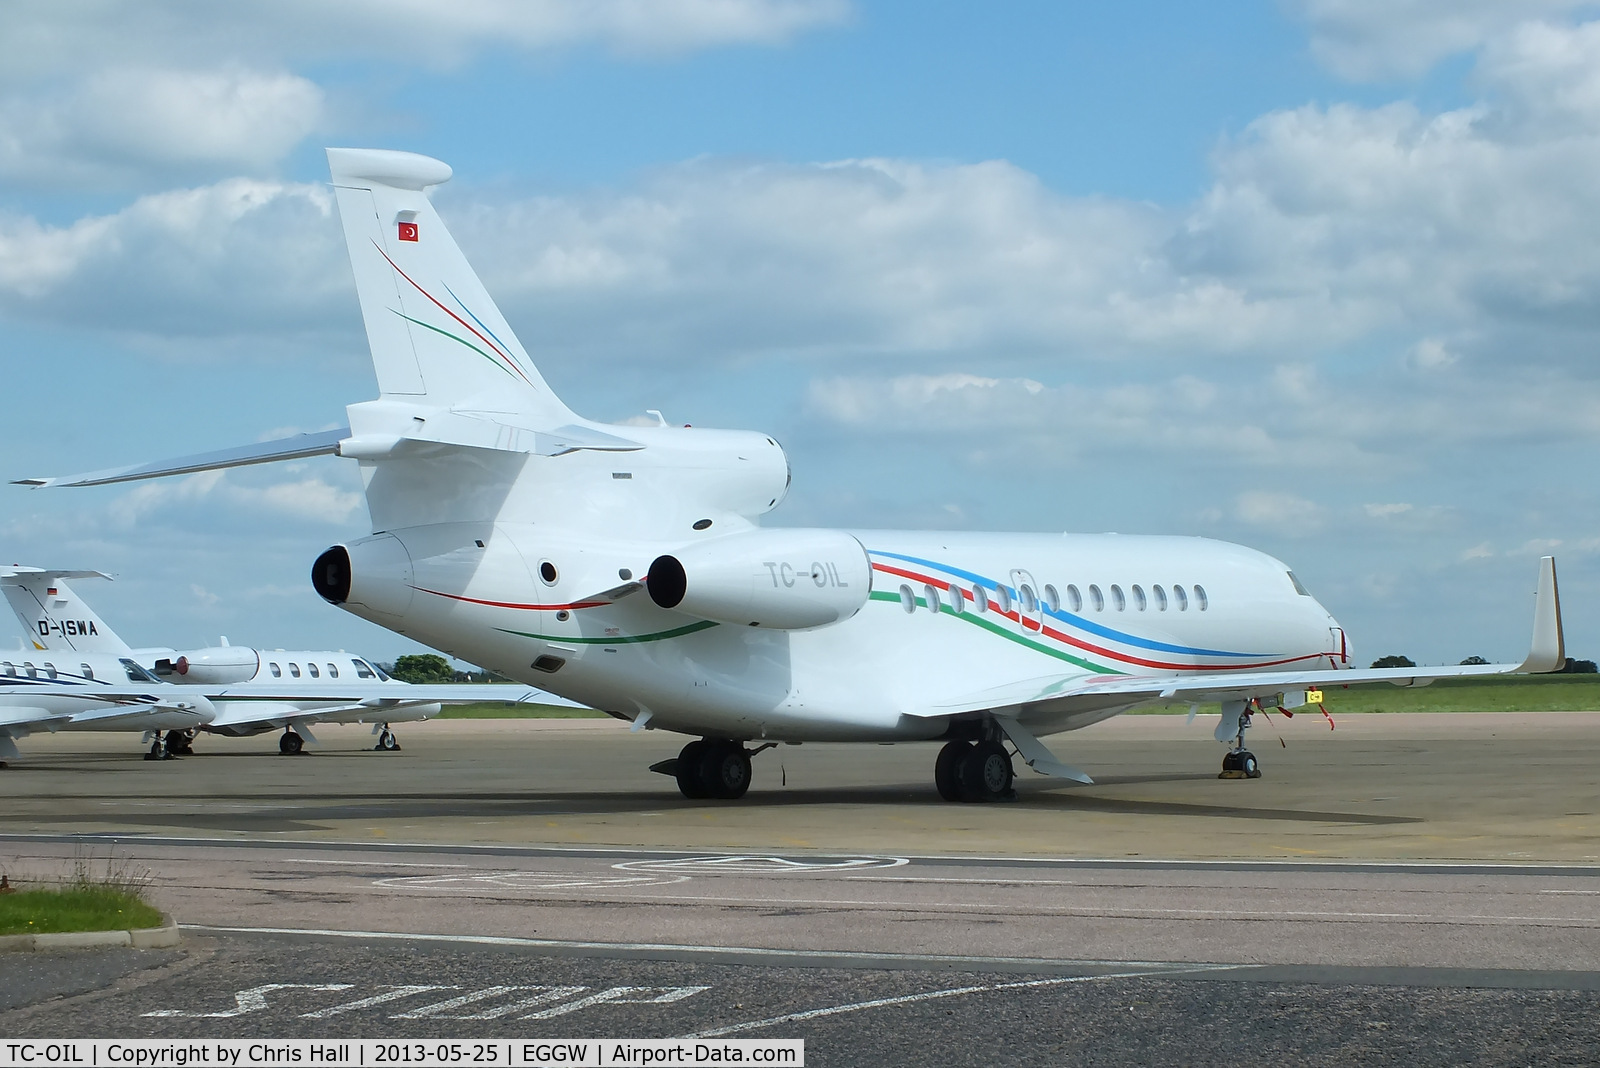 TC-OIL, 2013 Dassault Falcon 7X C/N 190, visitor for the Champions League Final